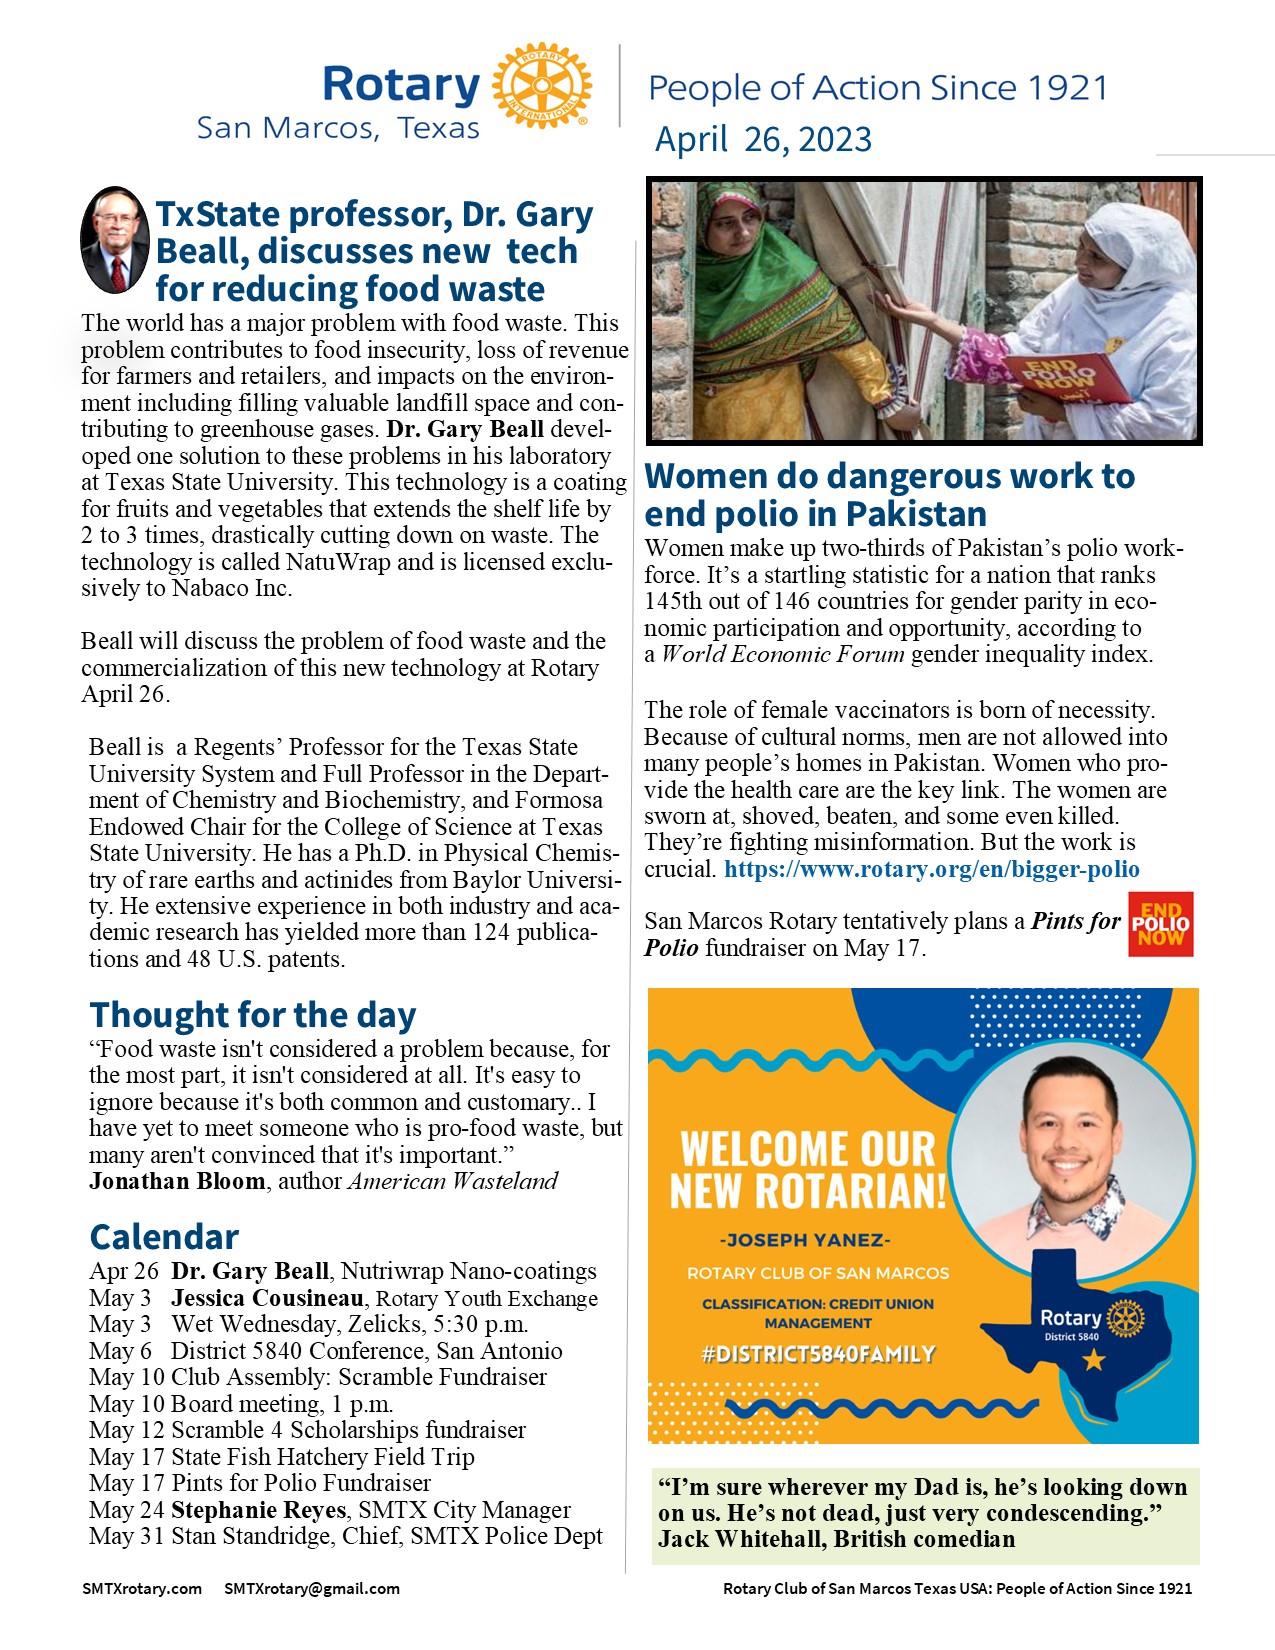 July 20 Rotary San Marcos Newsletter